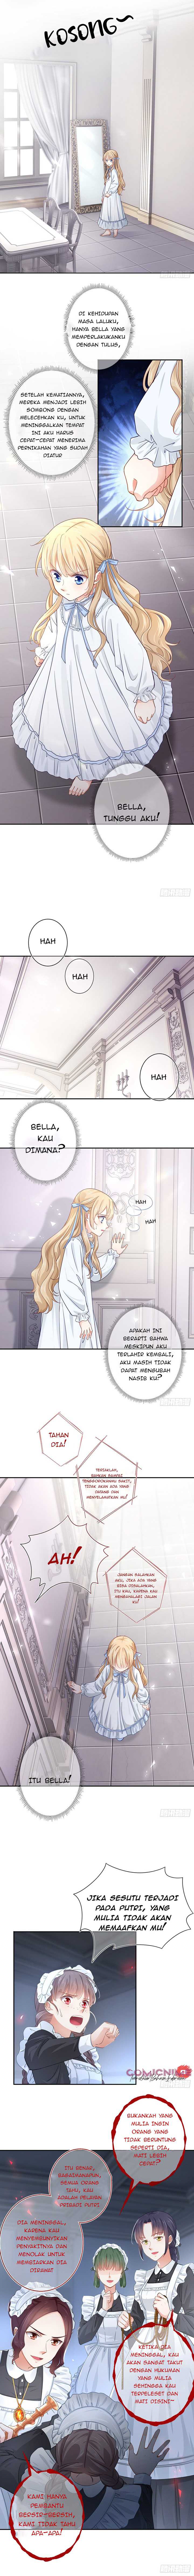 The King’s Beloved Daughter Chapter 2